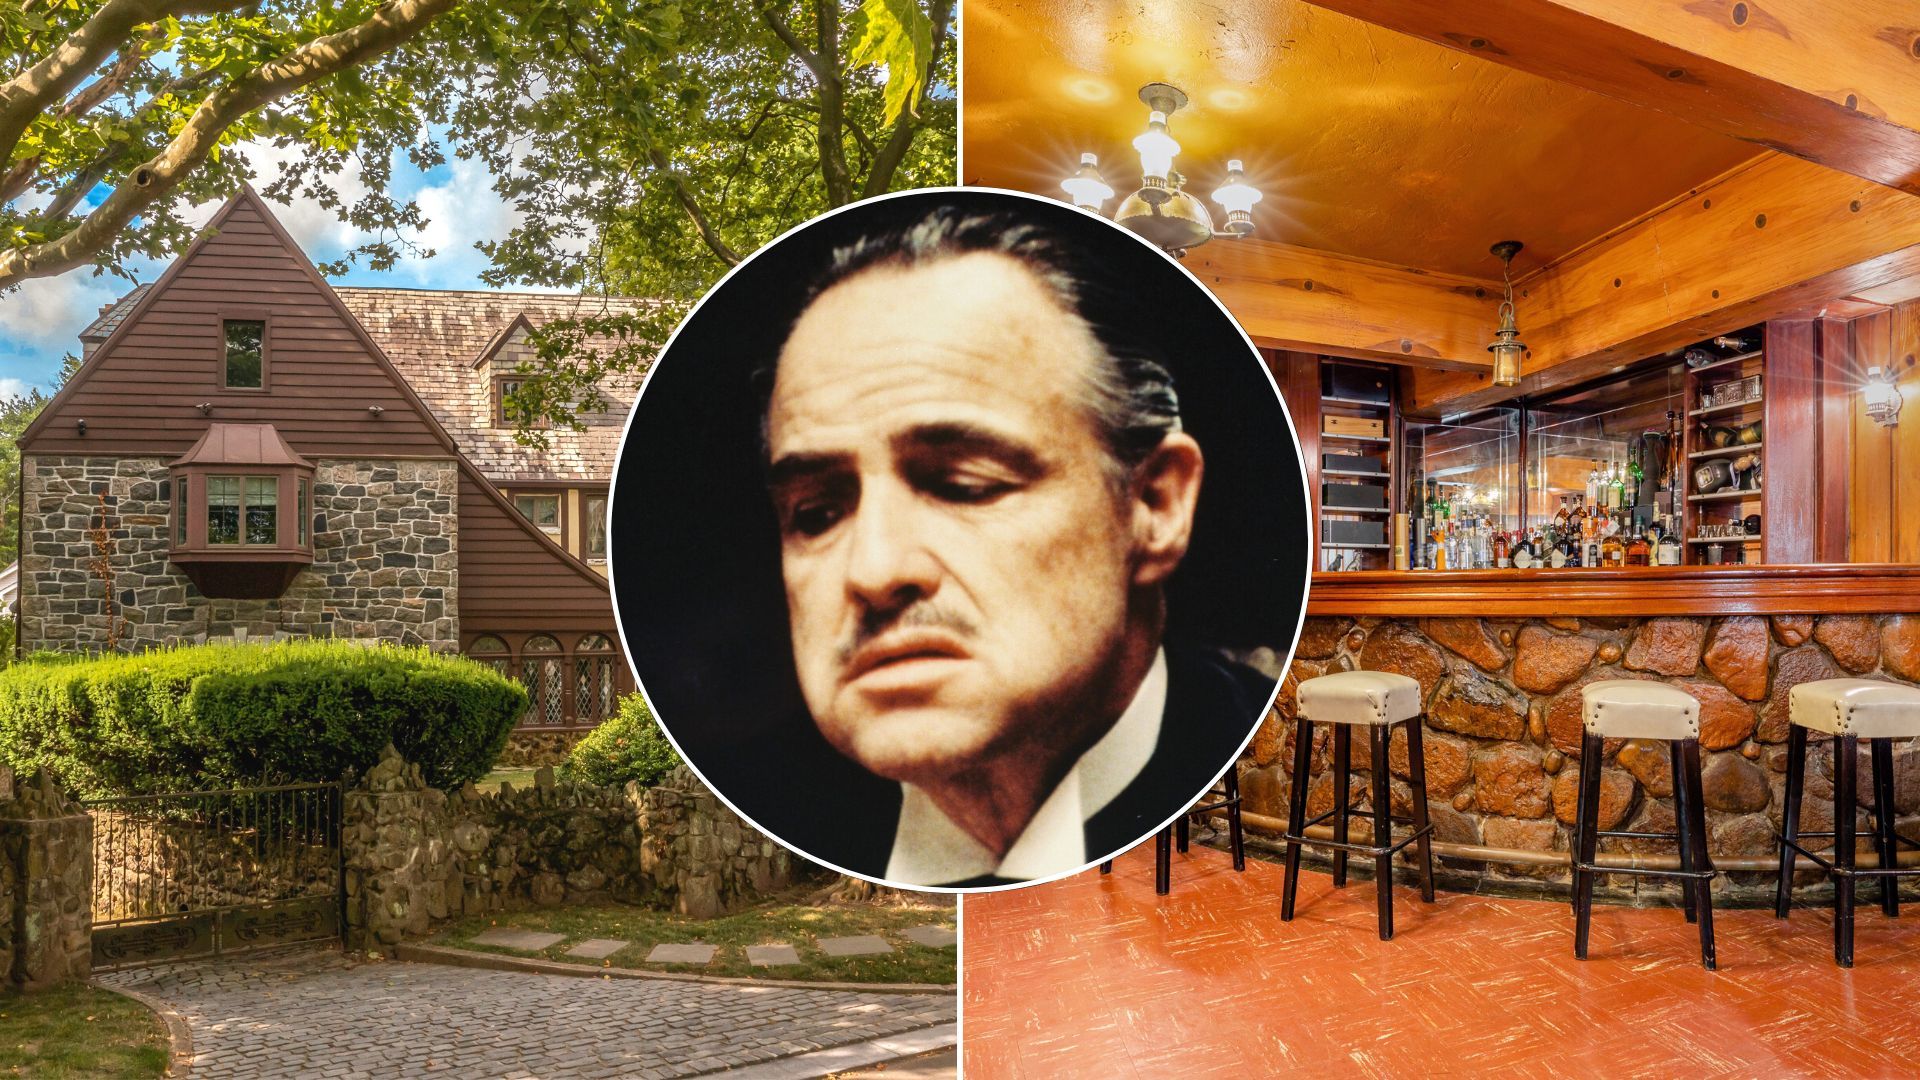 Rent Vito Corleone's 'The Godfather' home on Airbnb for under $75 a night